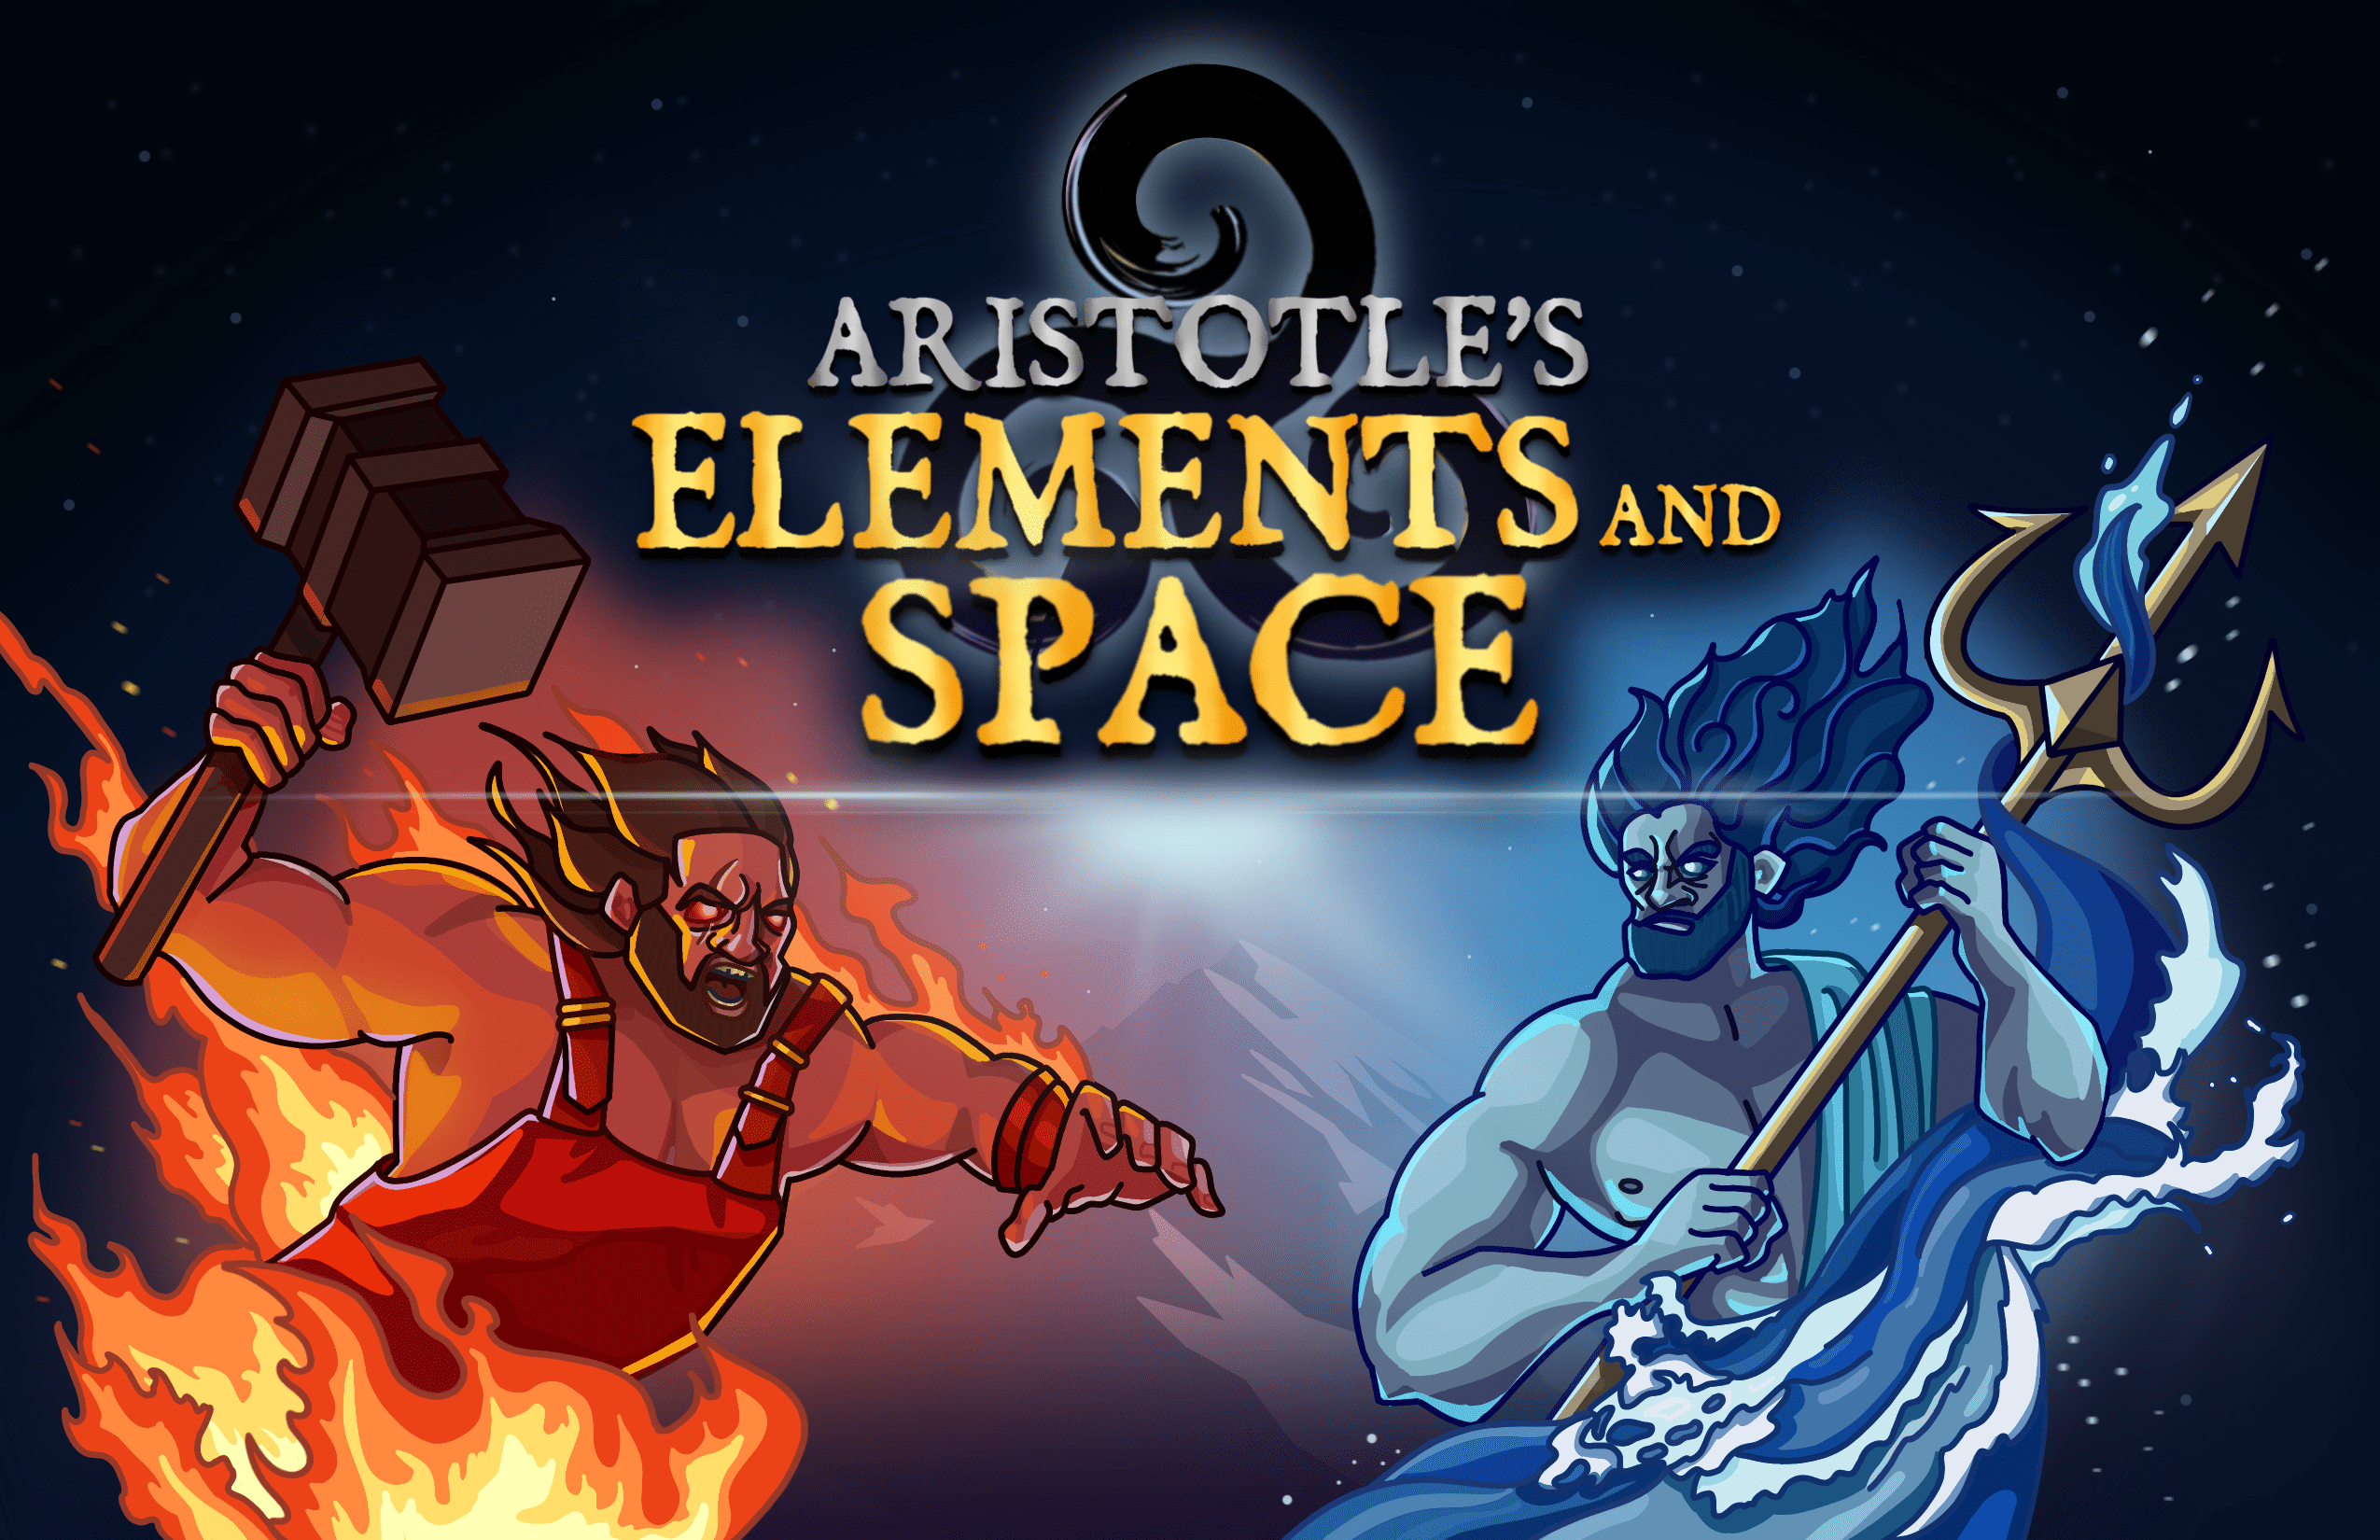 Aristotle's Elements and Space